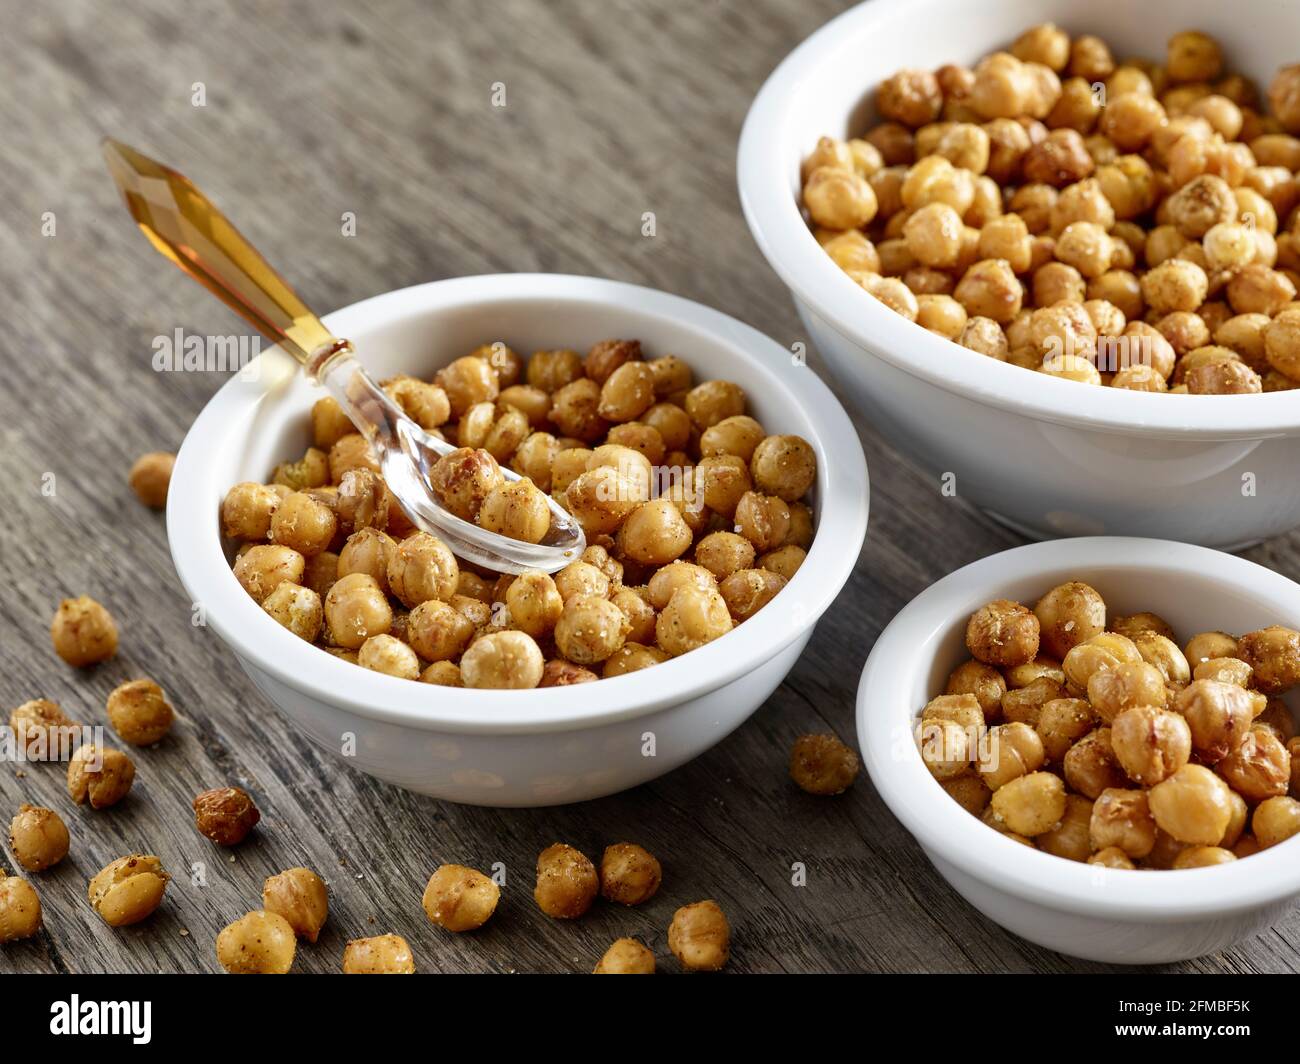 Ayurvedic cuisine - Oven-roasted chickpeas in porcelain bowls of various sizes on a wooden plate Stock Photo